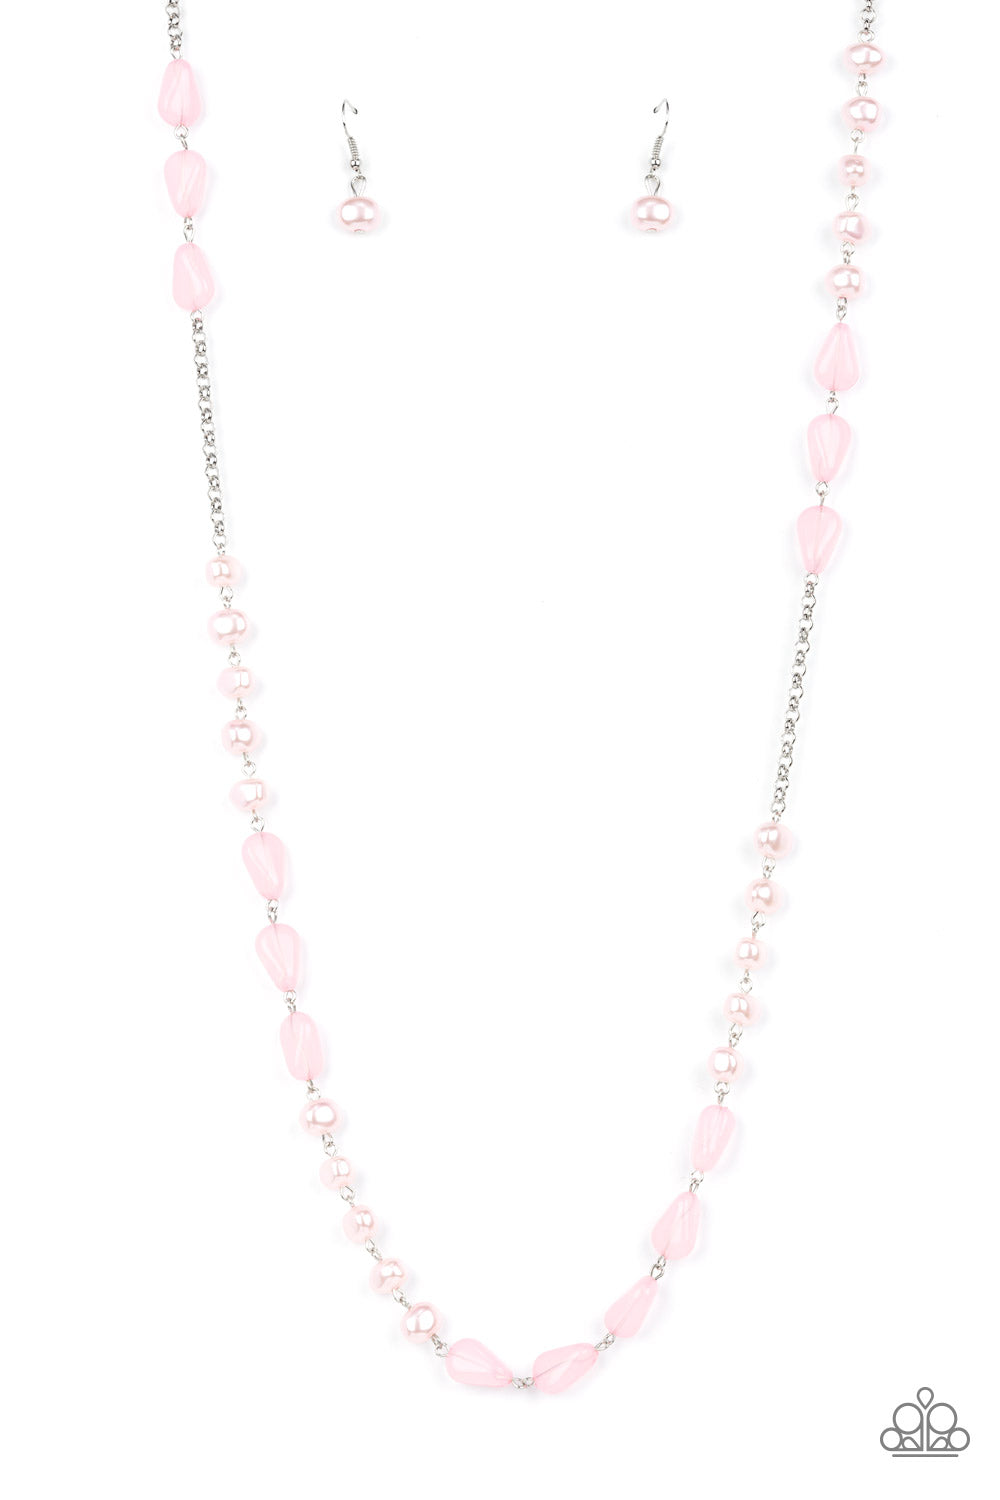 Shoreline Shimmer Paparazzi Accessories Necklace with Earrings Pink